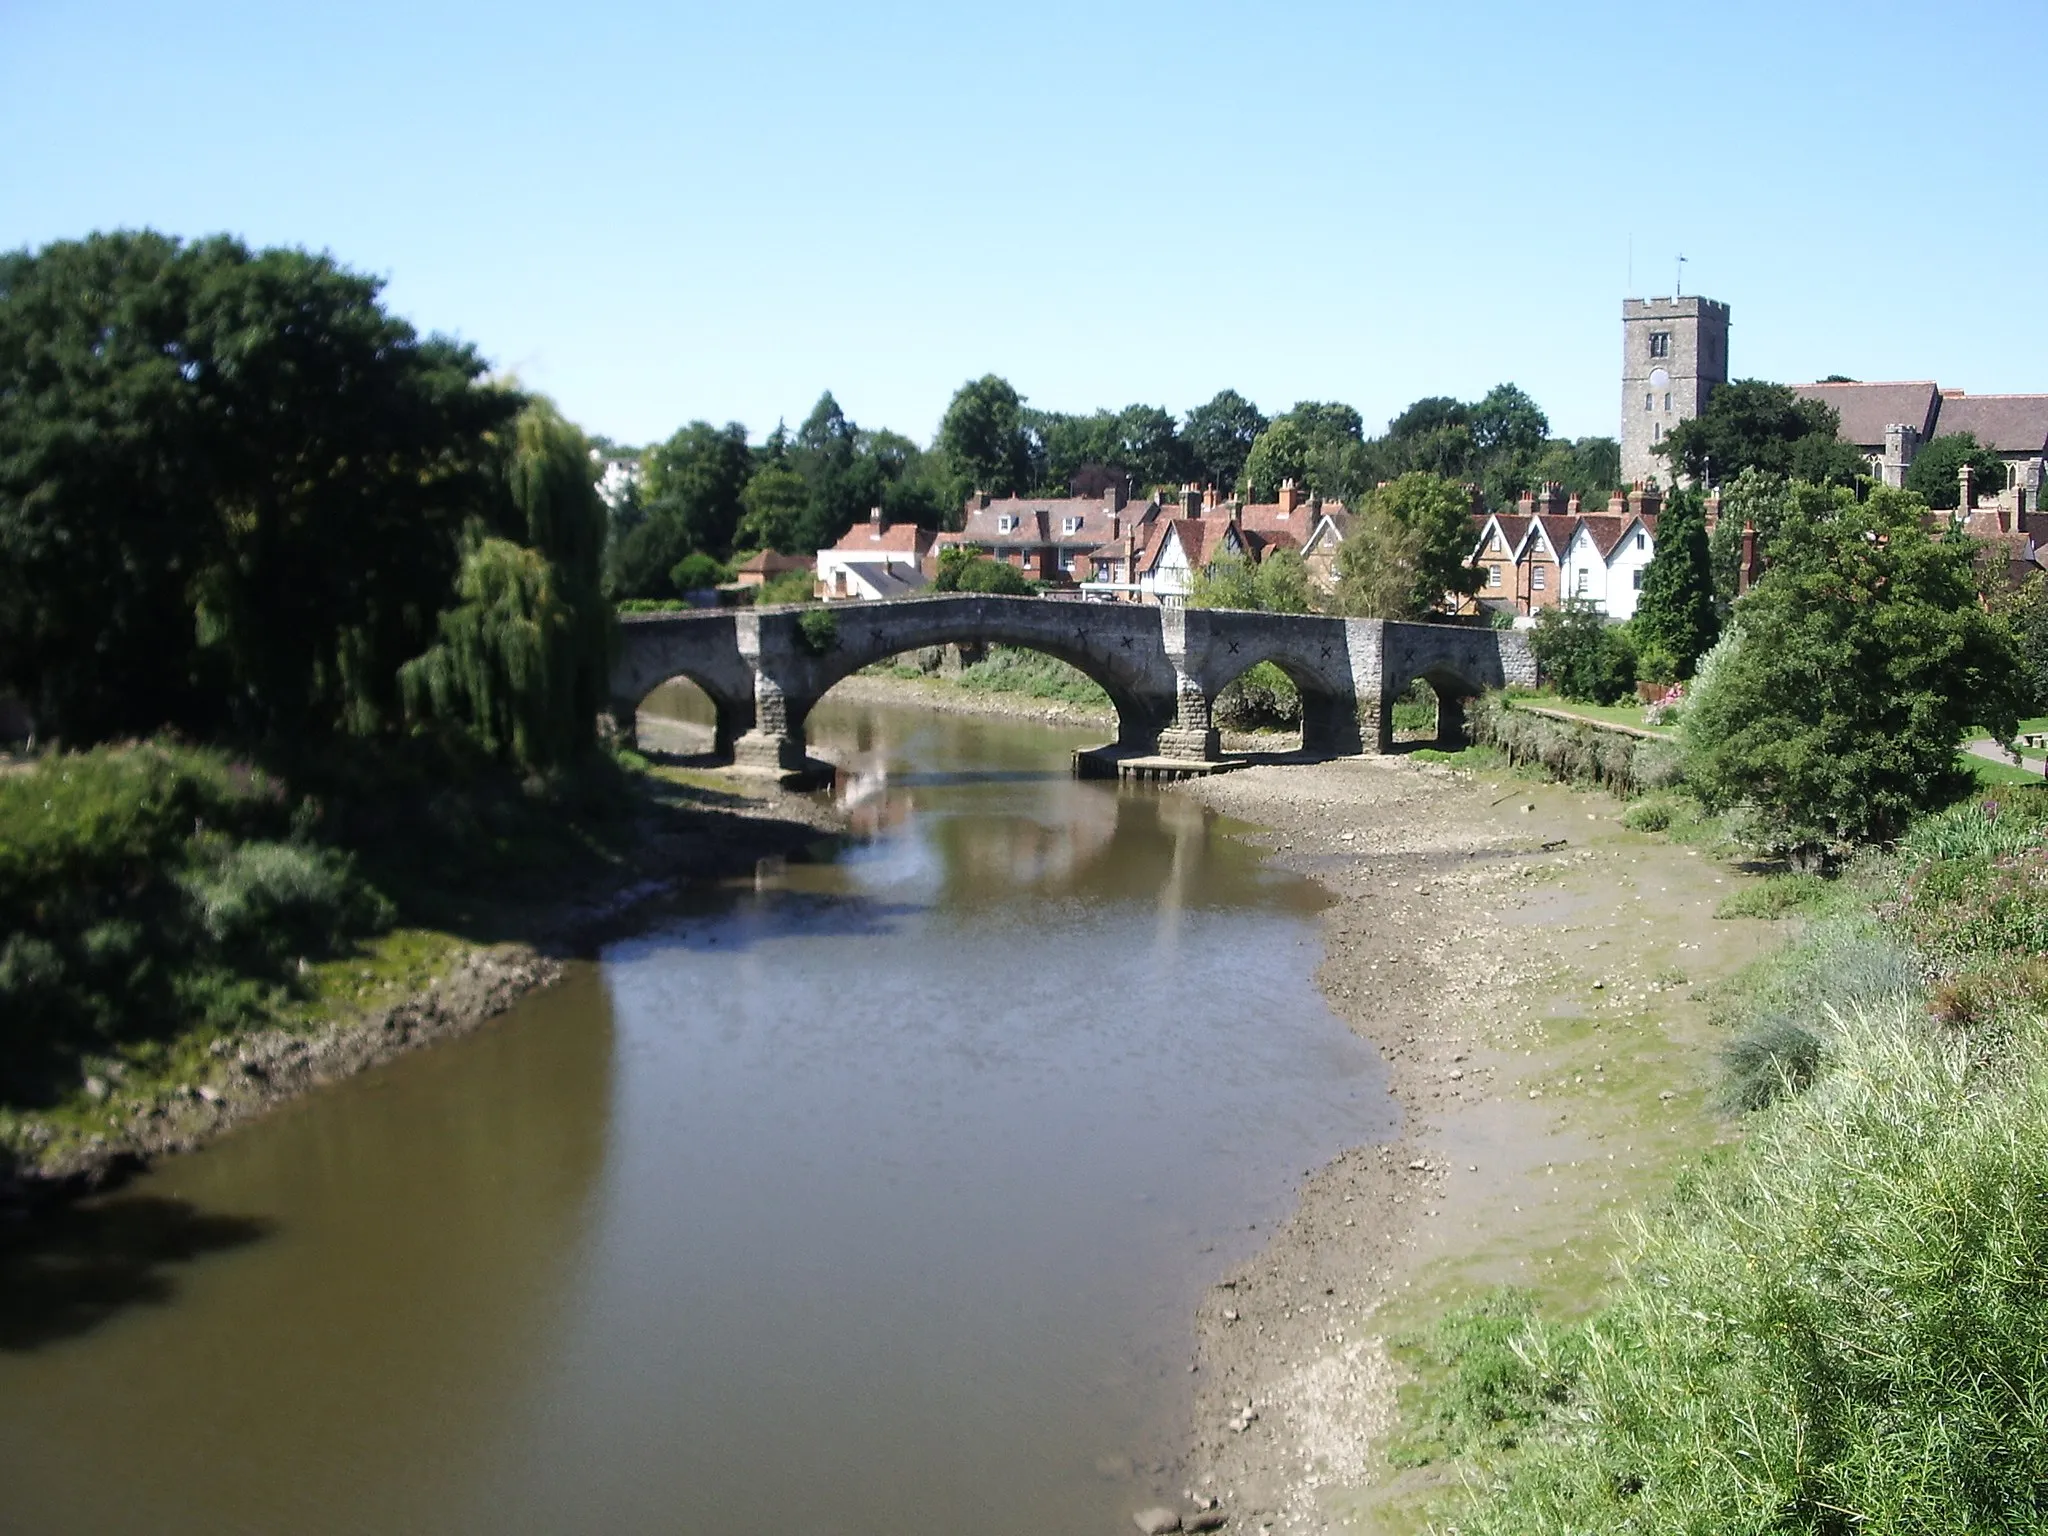 Photo showing: Medieval bridge crossing the River Medway at Aylesford, Kent, England.